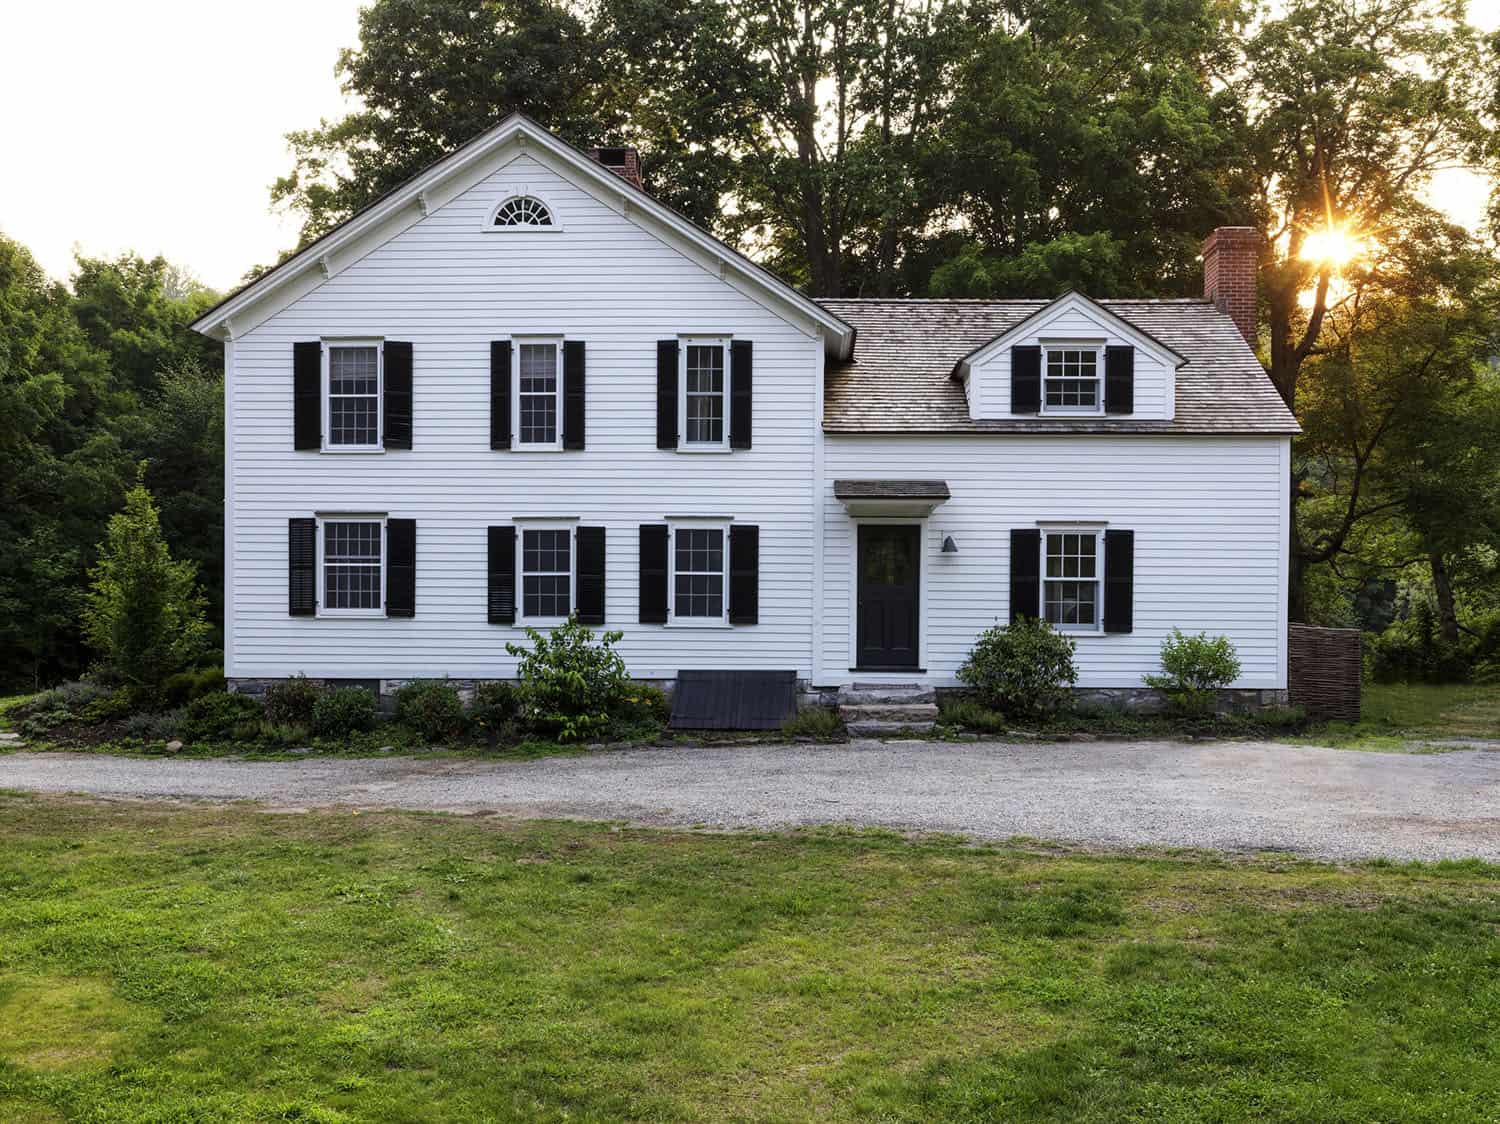 An 18th-century New York farmhouse with a beautiful restoration